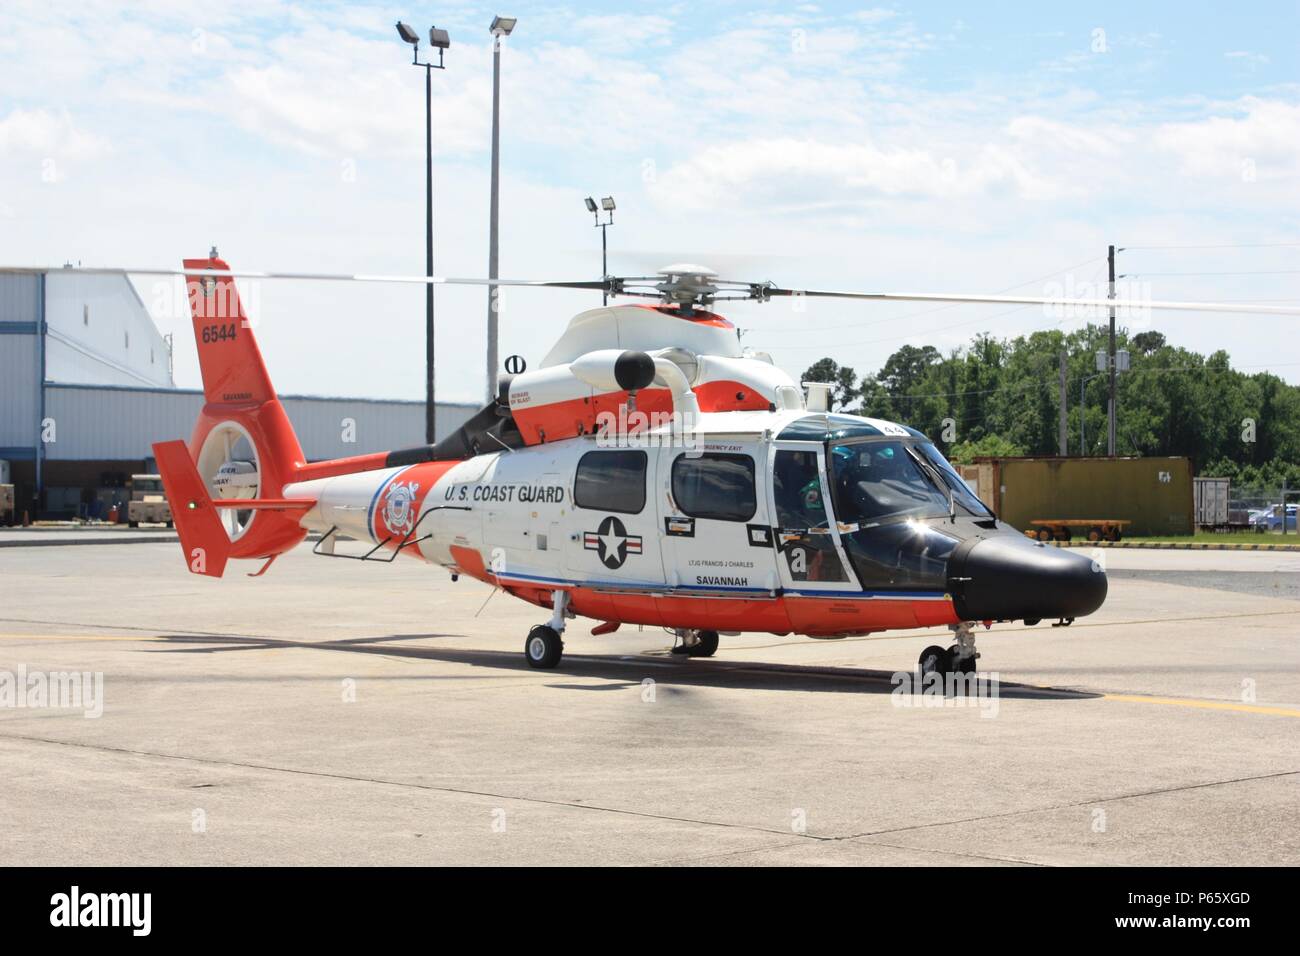 A specially-painted MH-65 Dolphin helicopter was flown to Coast Guard Air Station Savannah, Georgia, May 4, 2016, as part of a unit event highlighting the service’s 100 years of Coast Guard aviation. This helicopter is one of nine to display this particular paint scheme, reminiscent of many early Coast Guard helicopters. U.S. Coast Guard photo by Lt. Trent Meyers Stock Photo